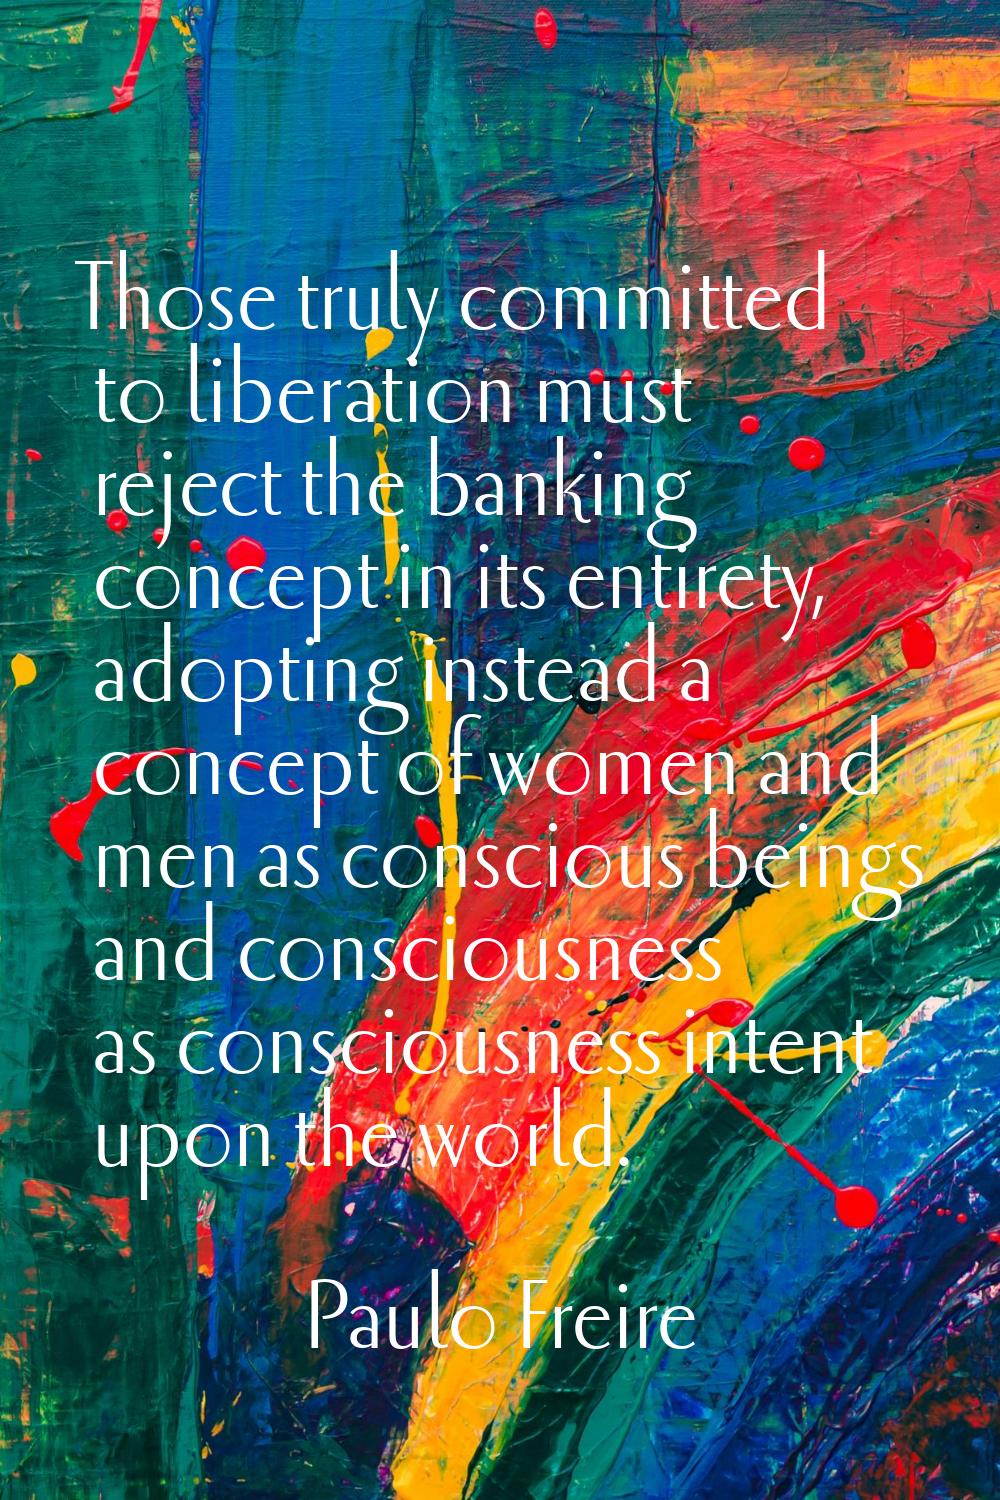 Those truly committed to liberation must reject the banking concept in its entirety, adopting inste